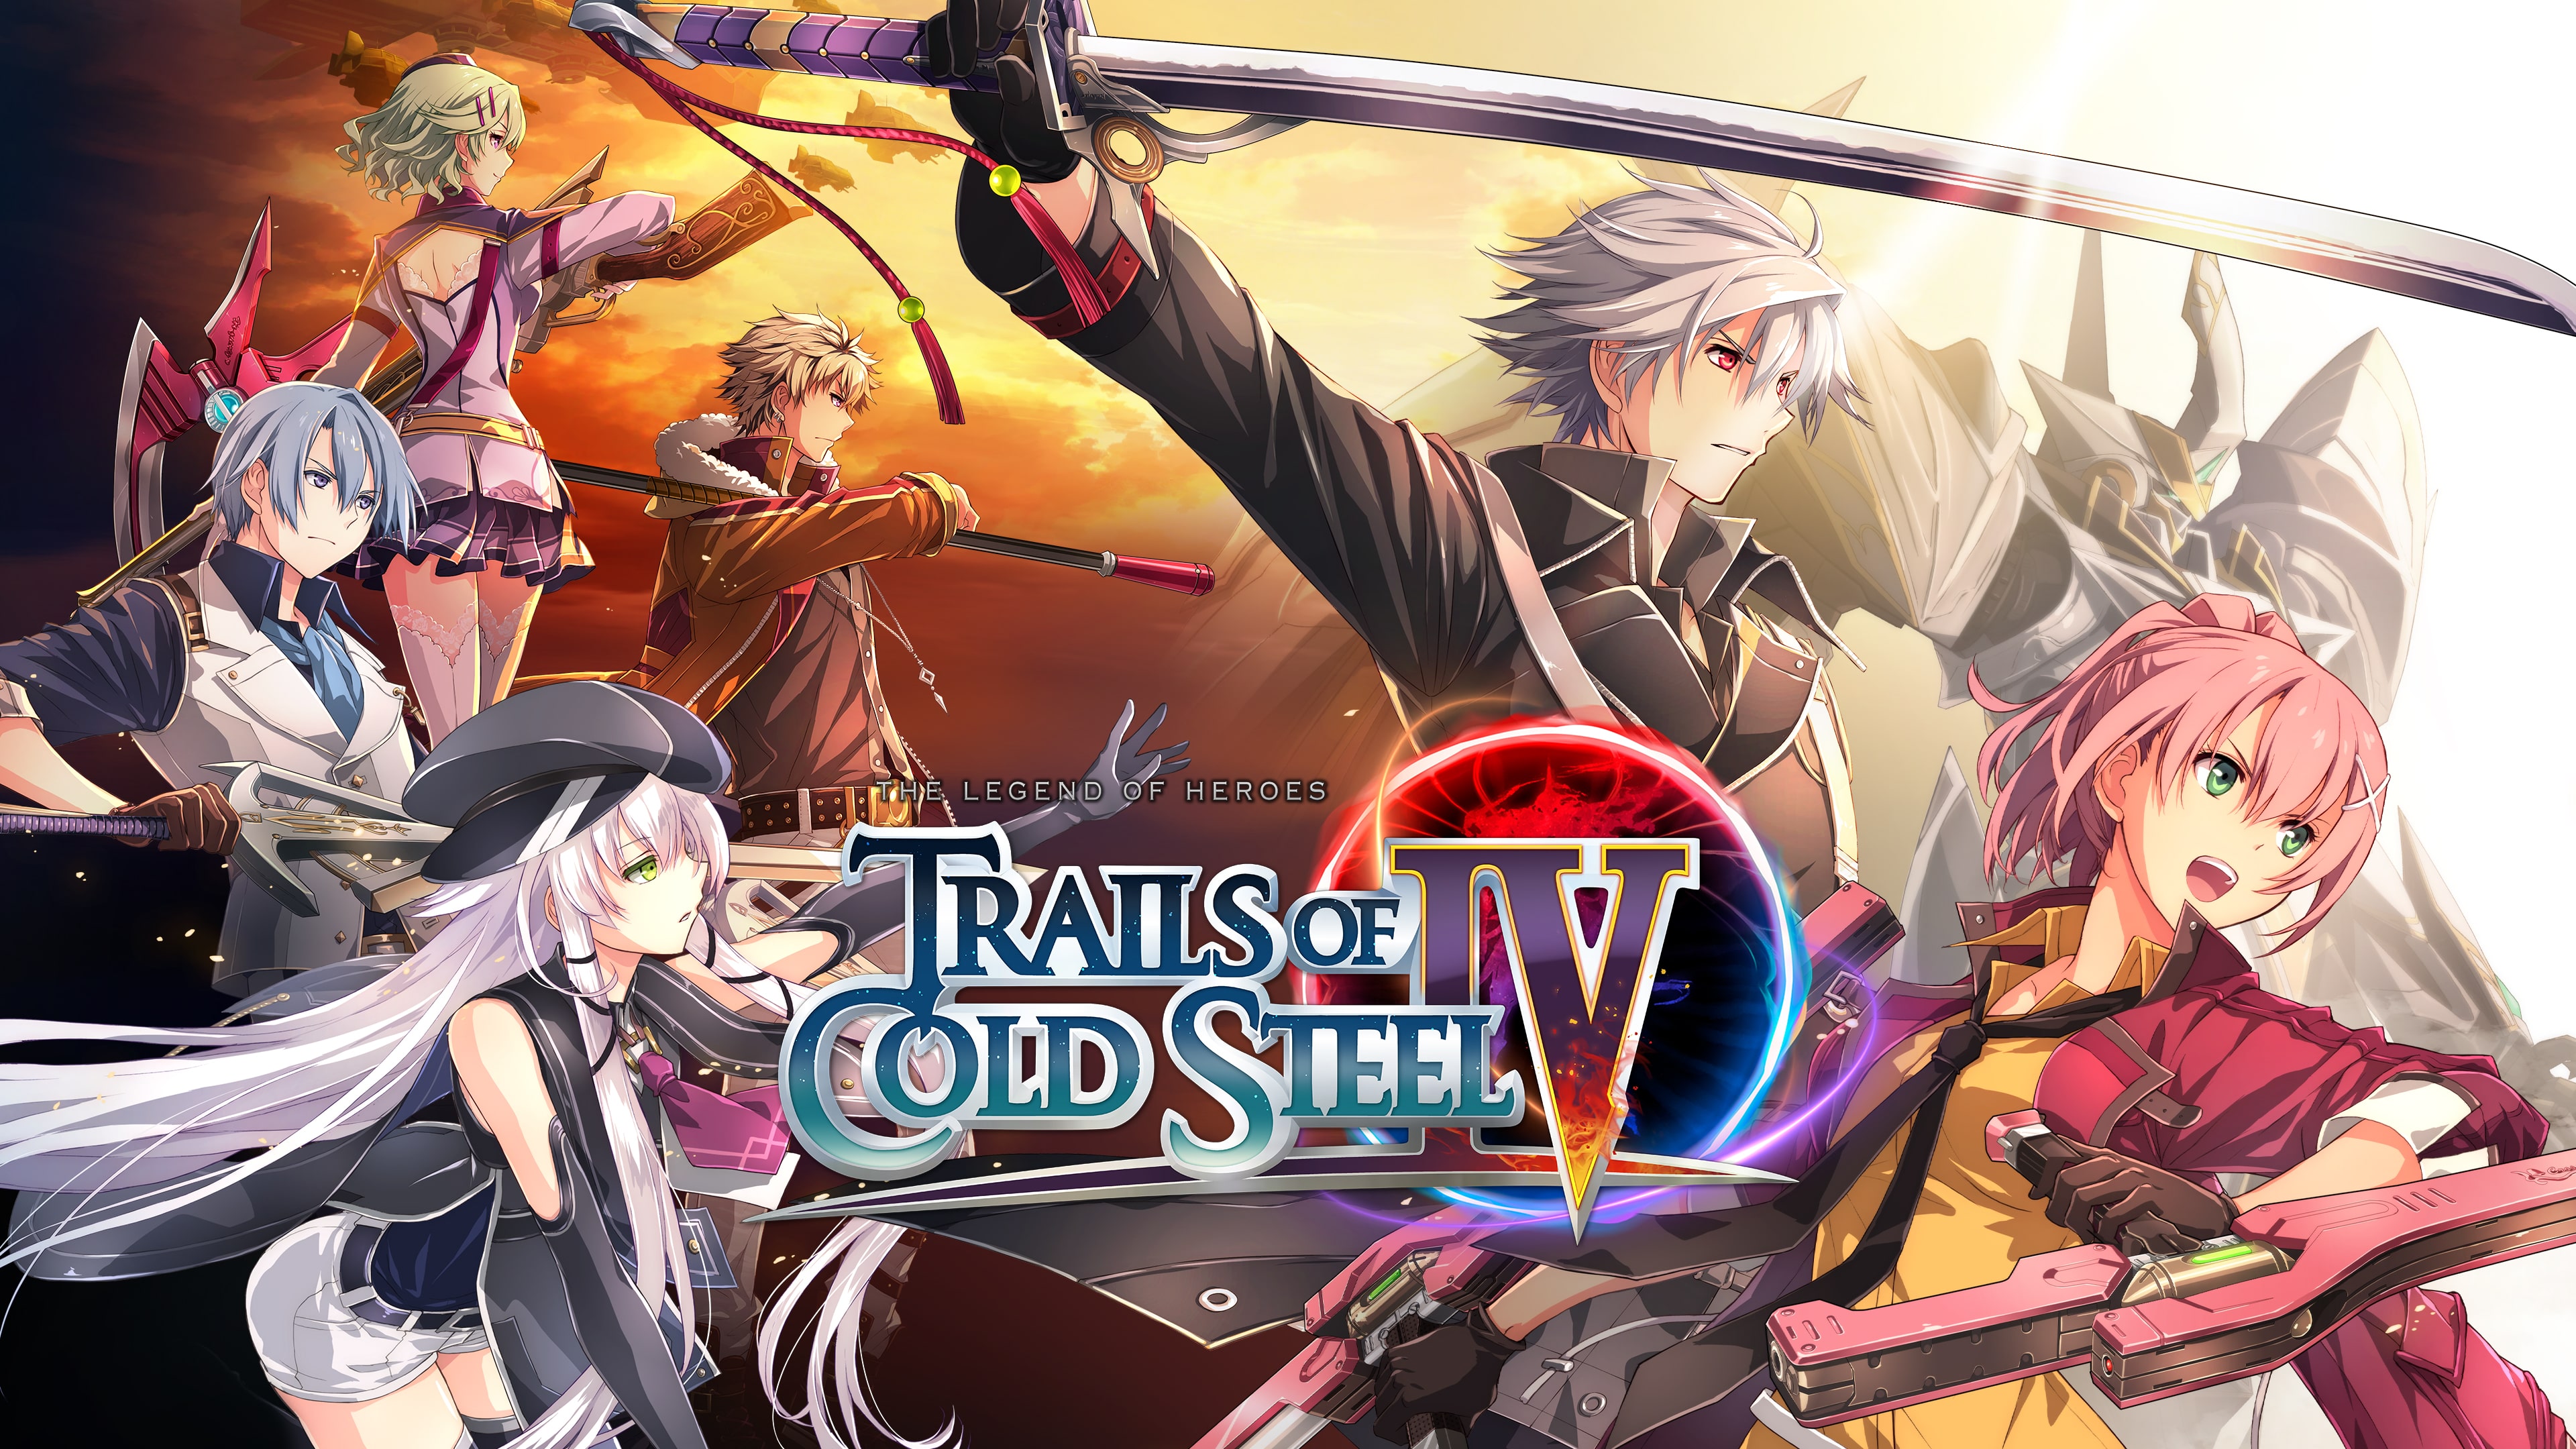 The Legend of Heroes: Trails of Cold Steel IV Digital Deluxe Edition